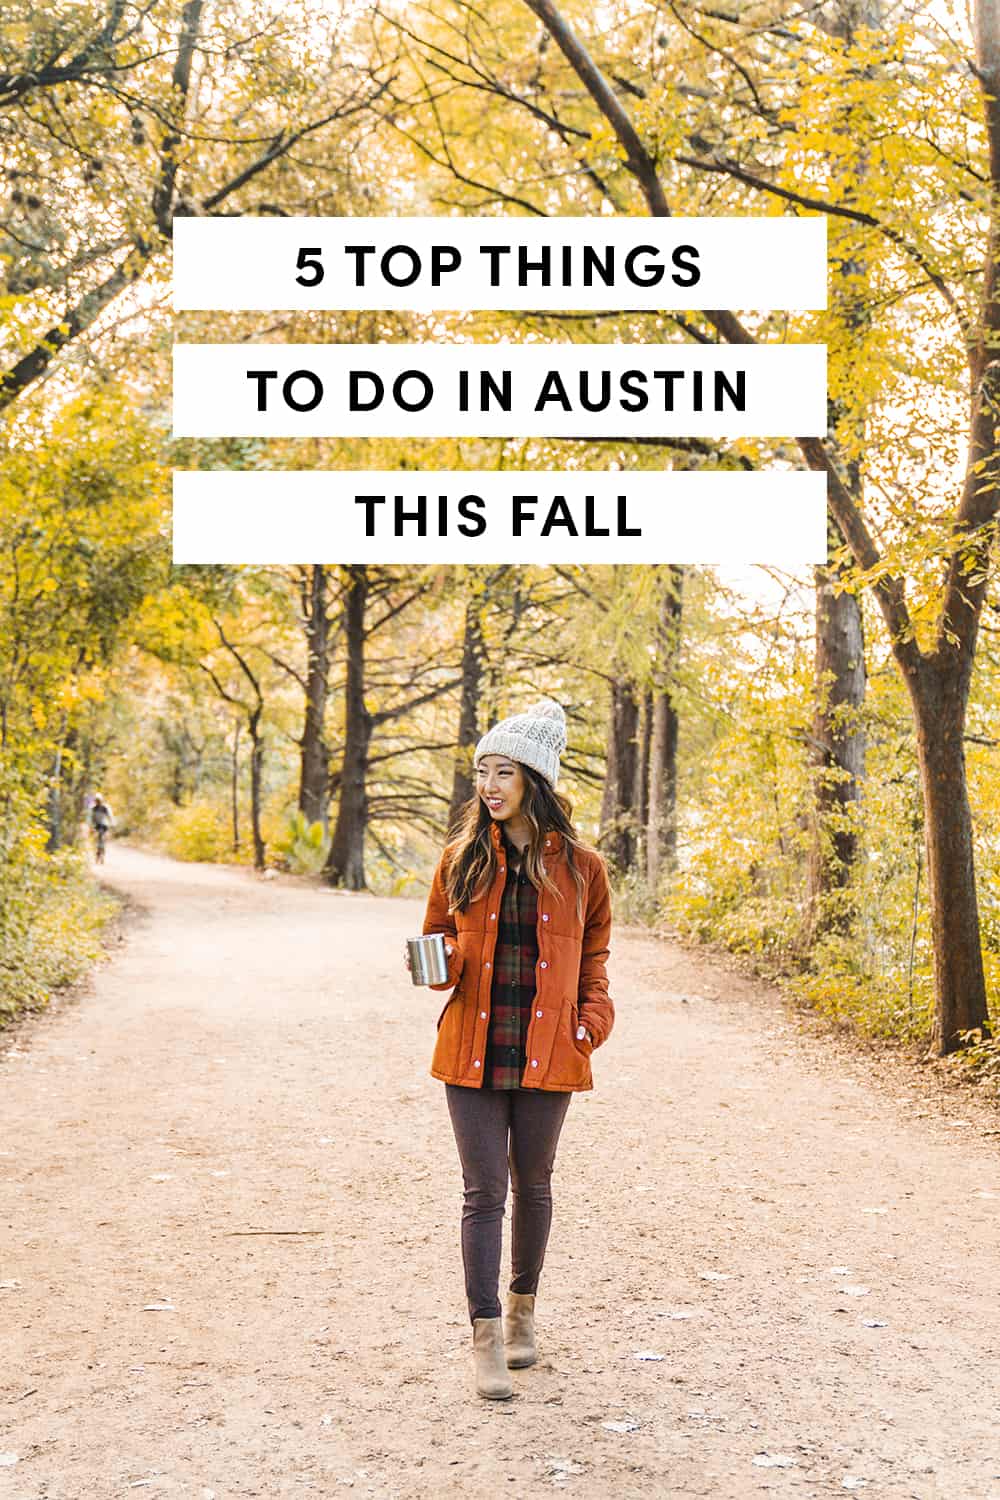 5 Top Things To Do In Austin This Fall